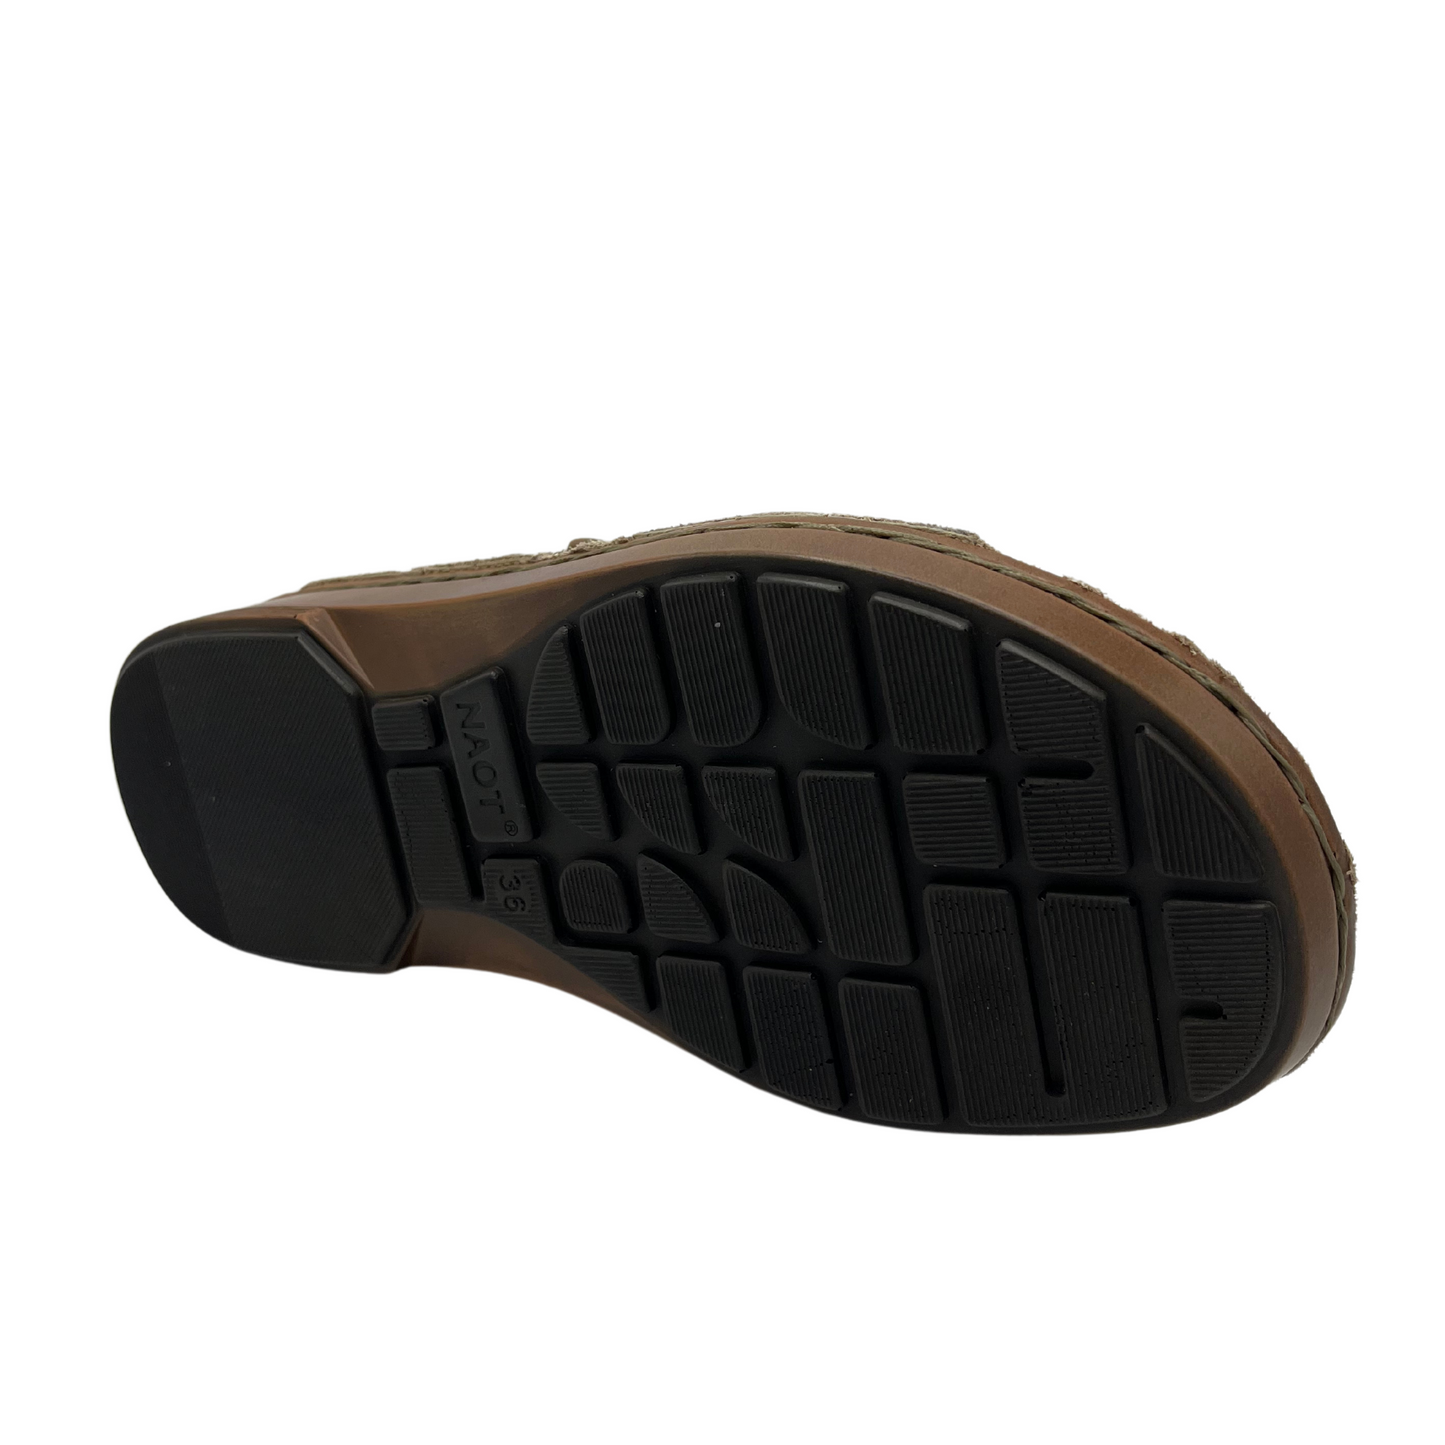 Bottom view of khaki leather sandal with velcro toe strap, padded collar and suede lined footbed